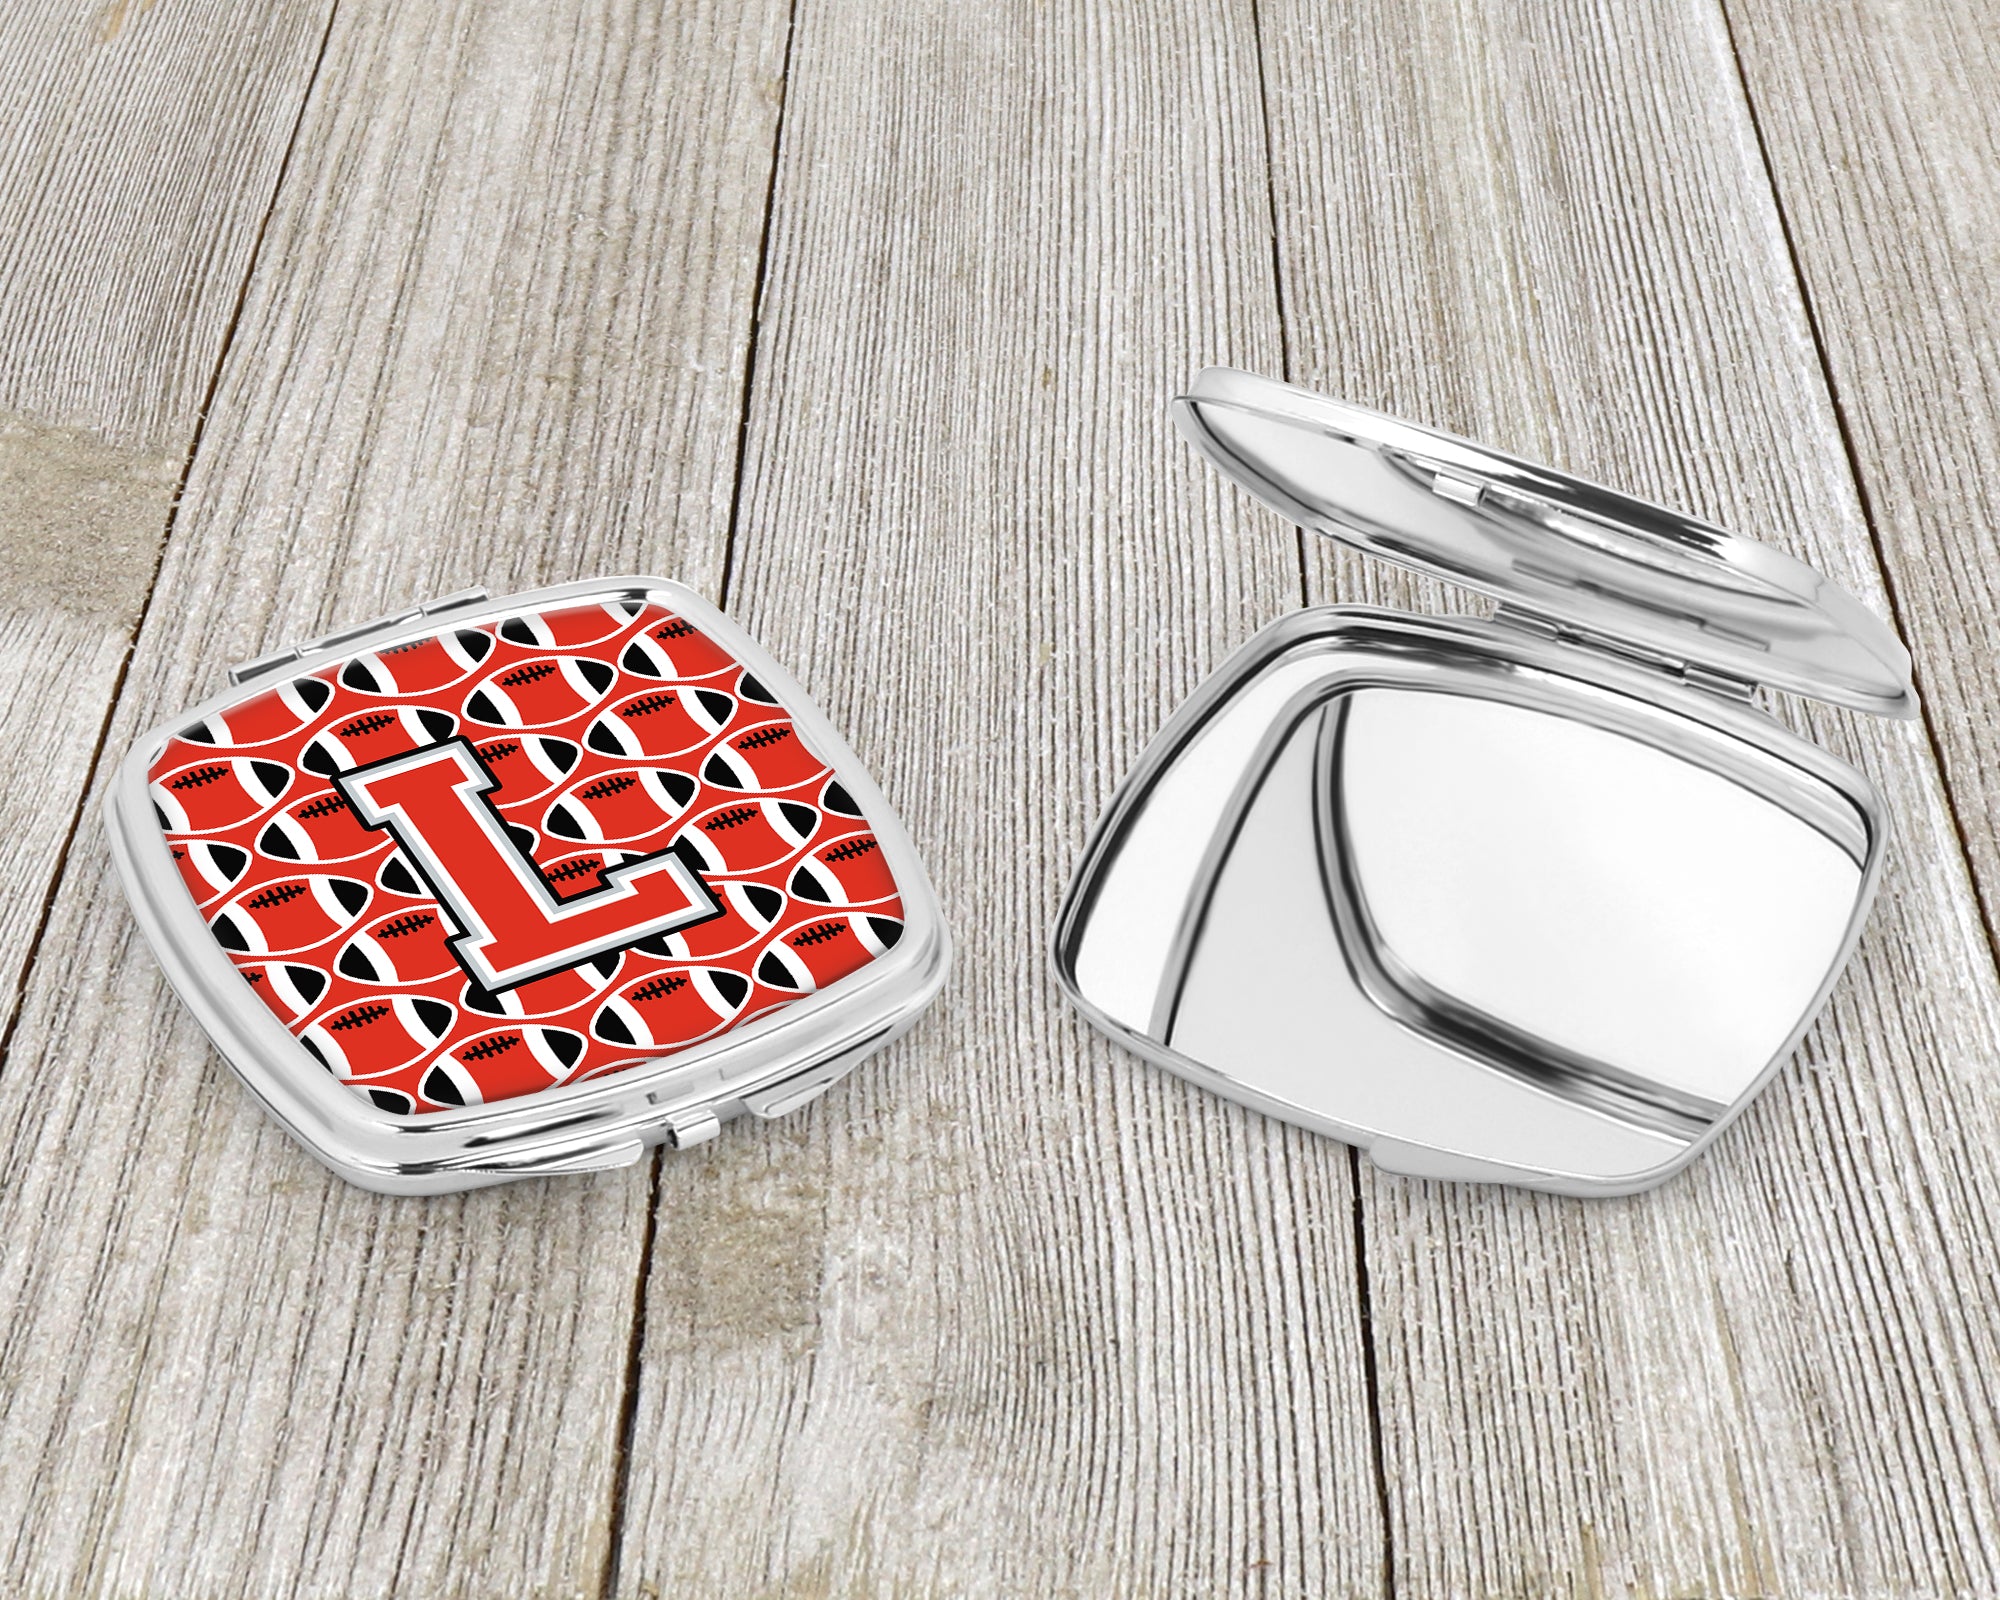 Letter L Football Scarlet and Grey Compact Mirror CJ1067-LSCM